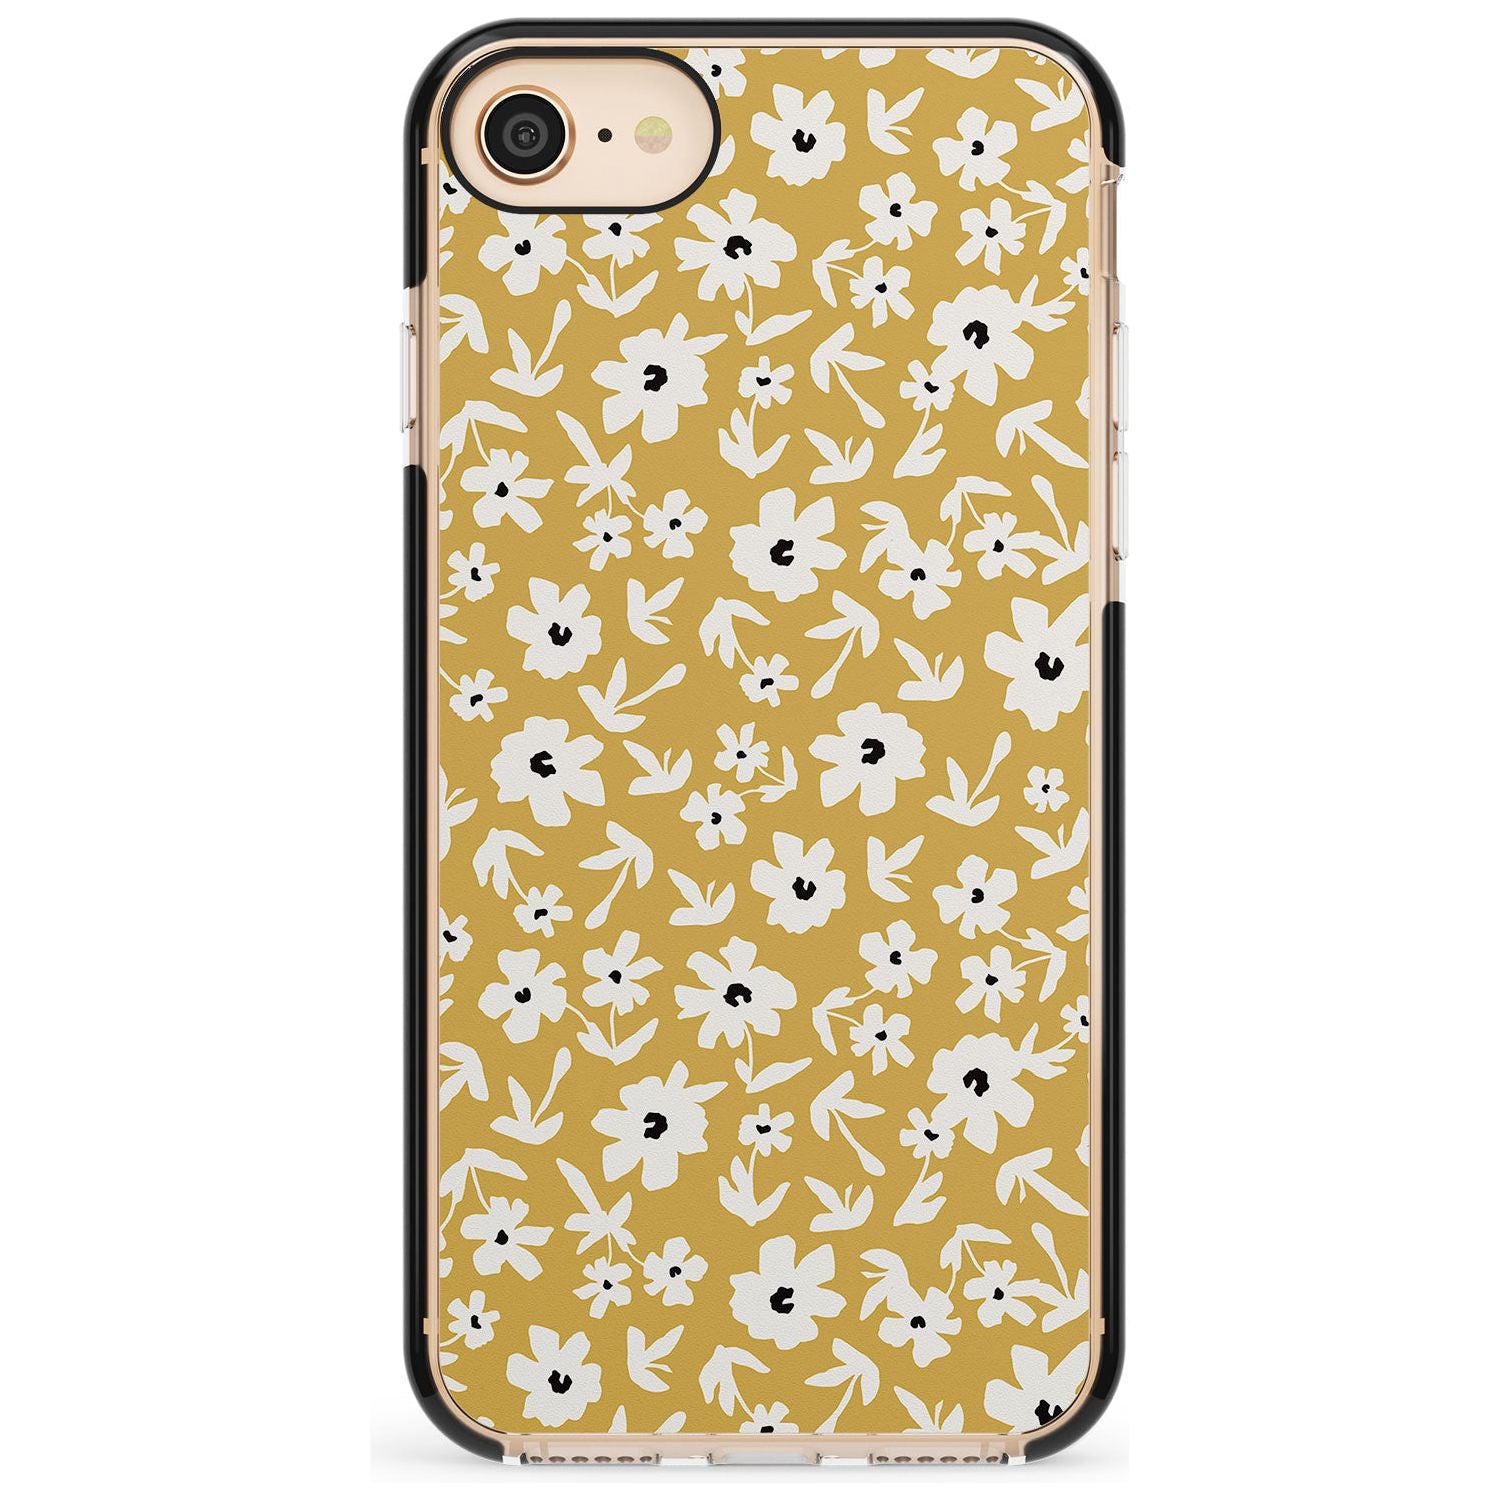 Floral Print on Mustard - Cute Floral Design Pink Fade Impact Phone Case for iPhone SE 8 7 Plus